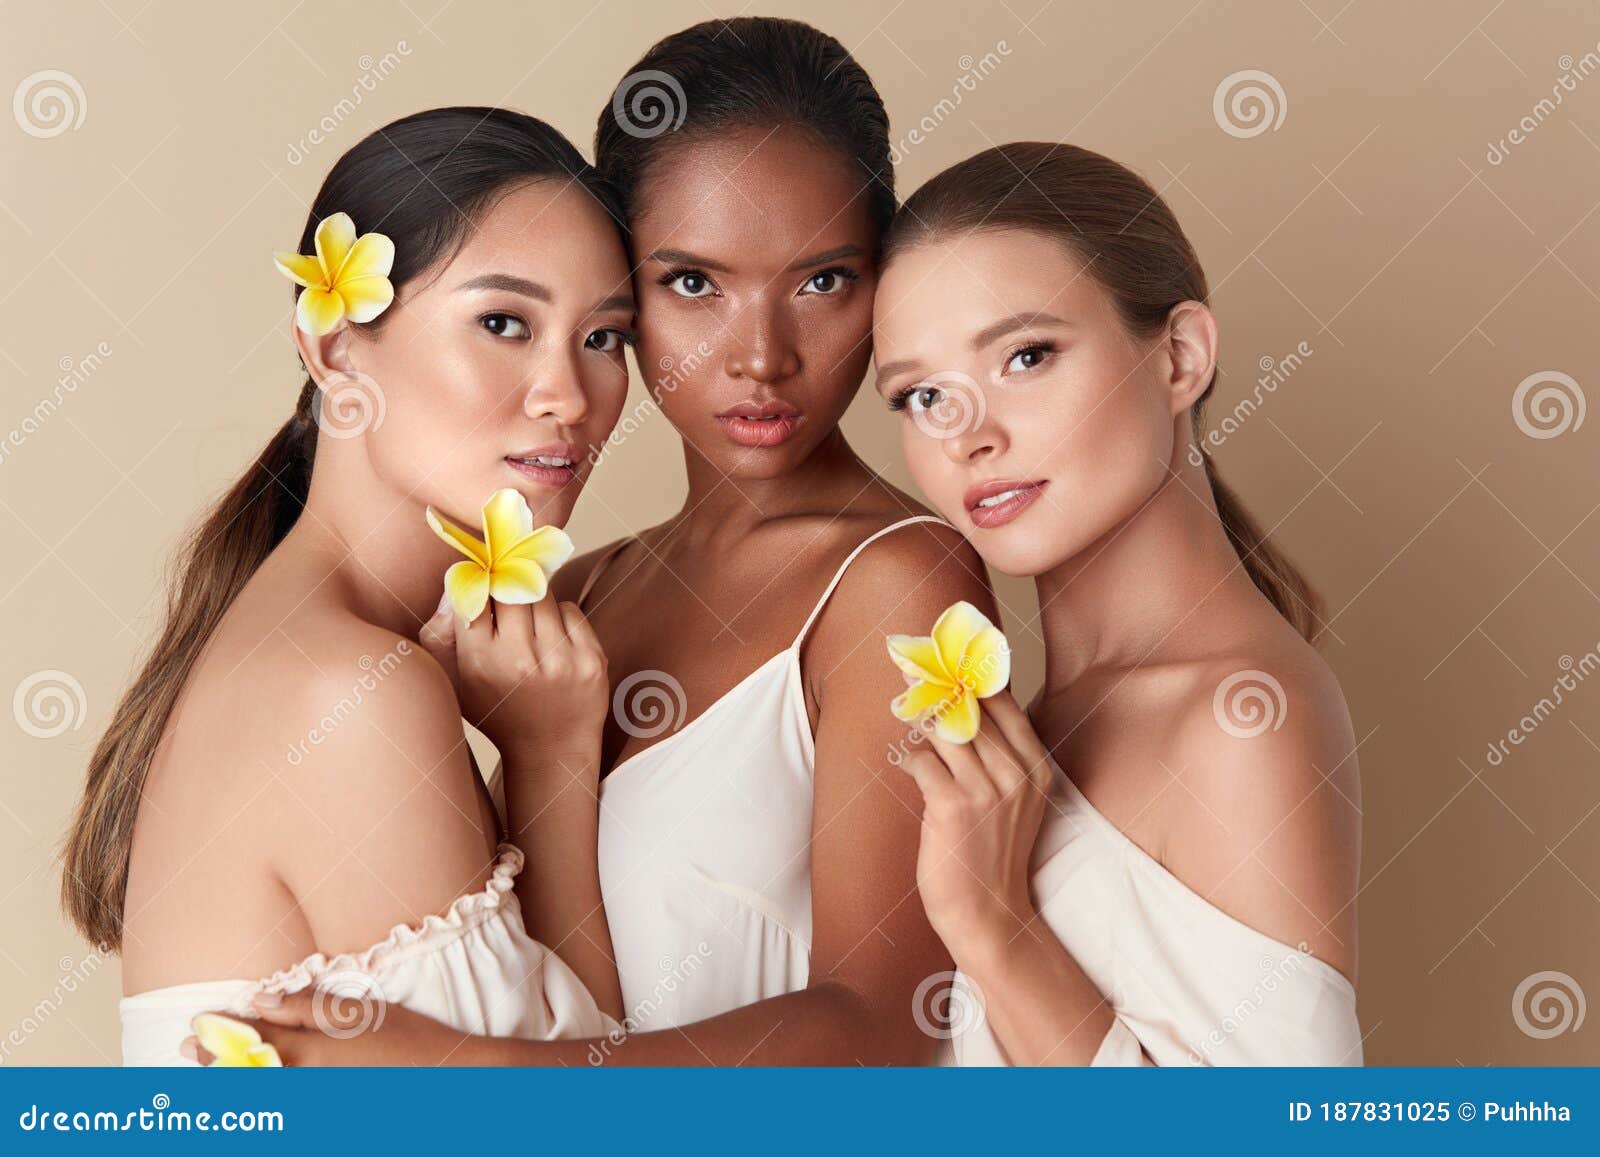 beauty. diverse group of women portrait. tender models of different ethnicity posing with tropical flowers in hands.